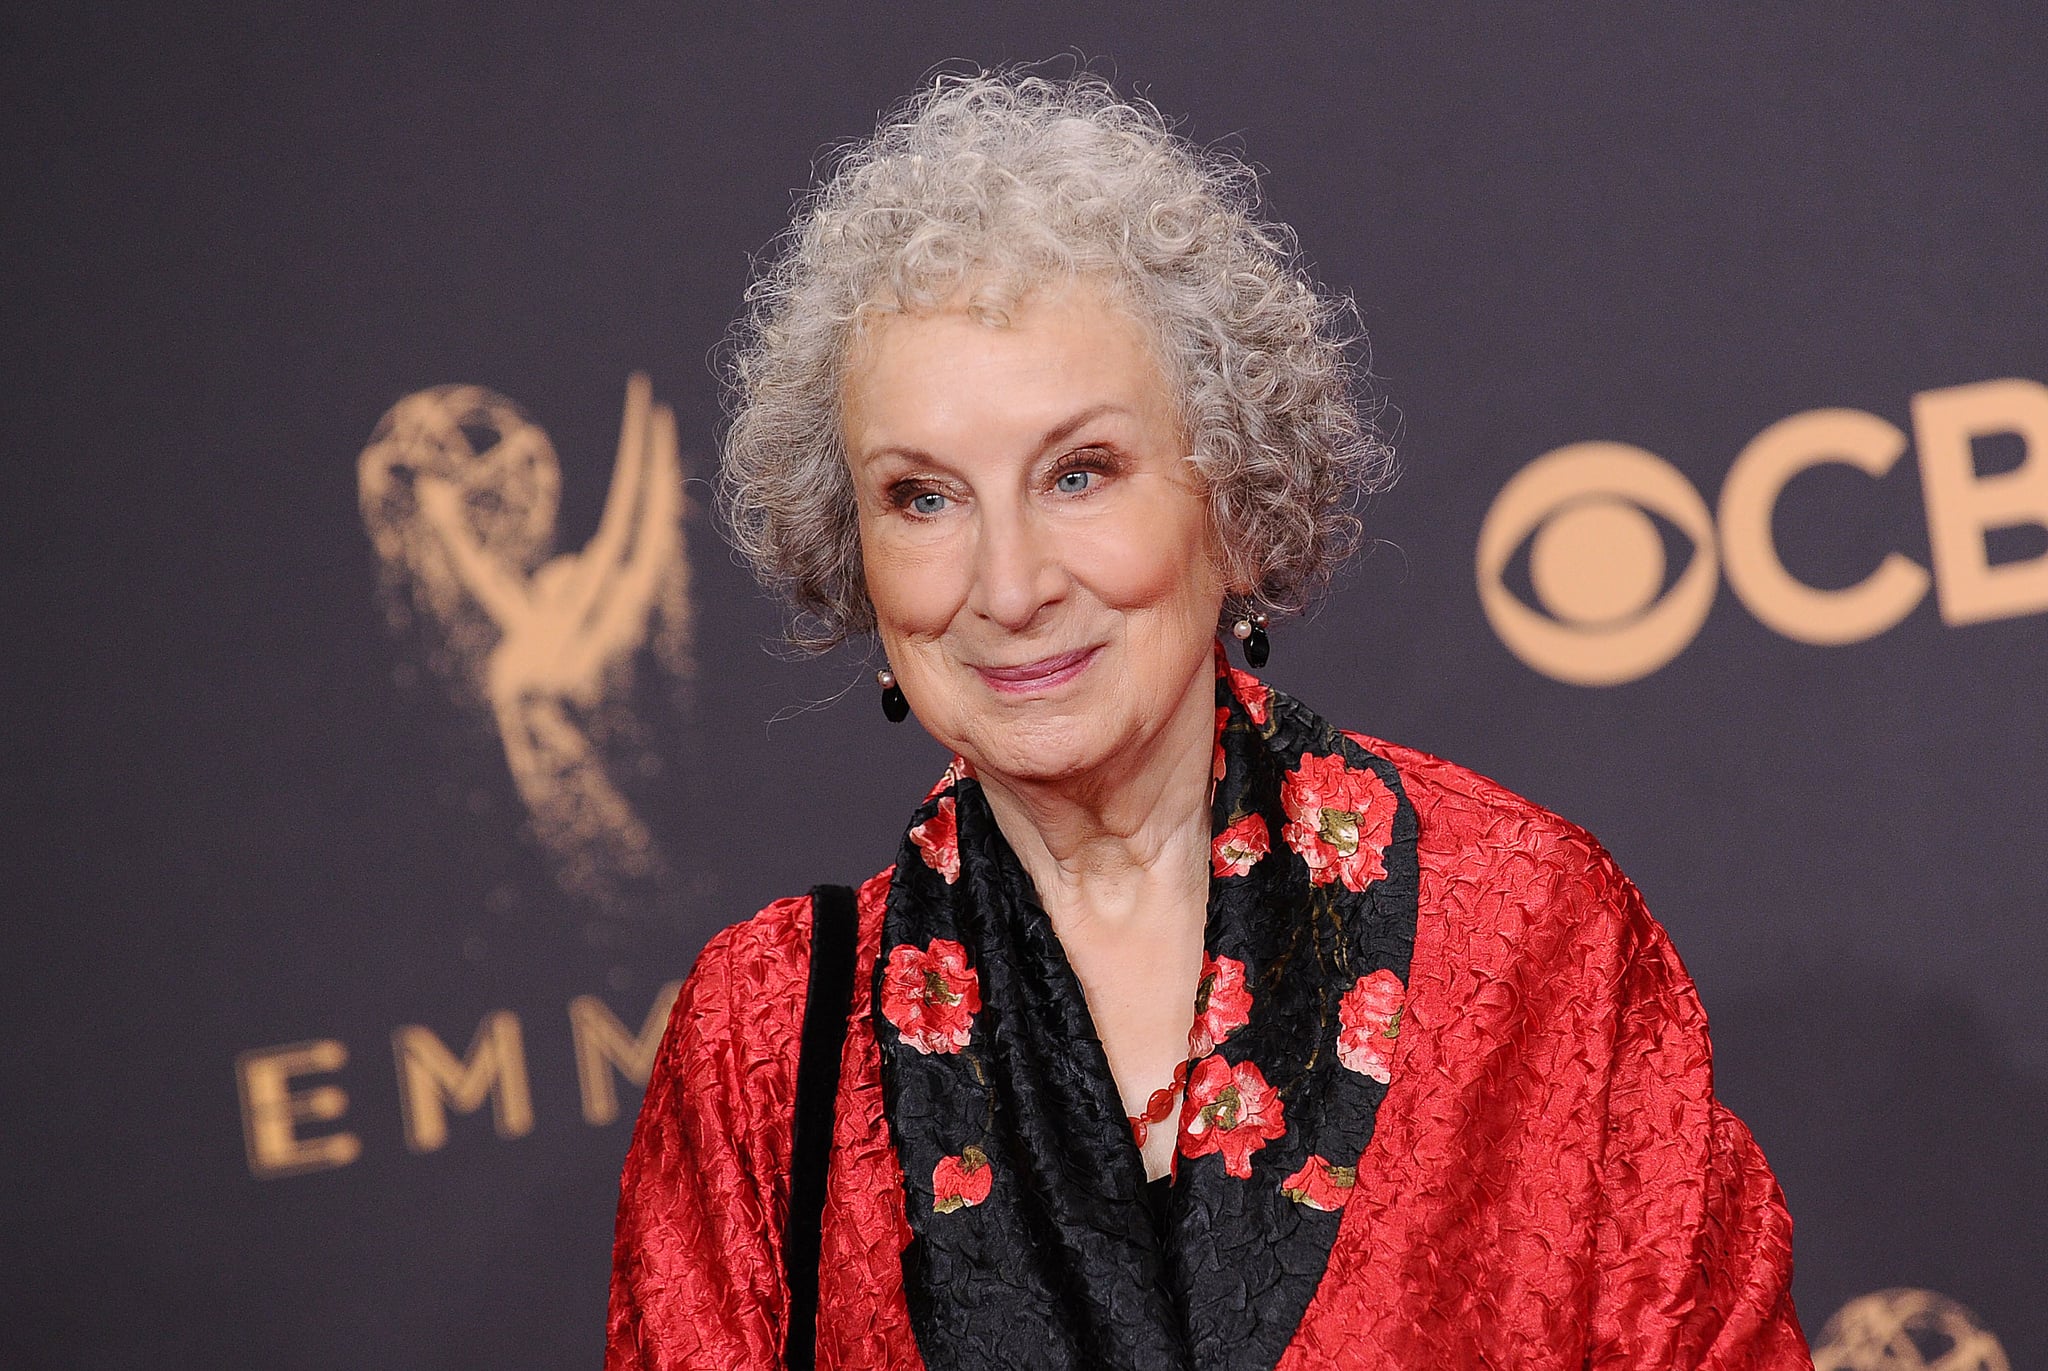 Margaret Atwood Backstage at the Emmys: "Never Believe It Can Never Ha...